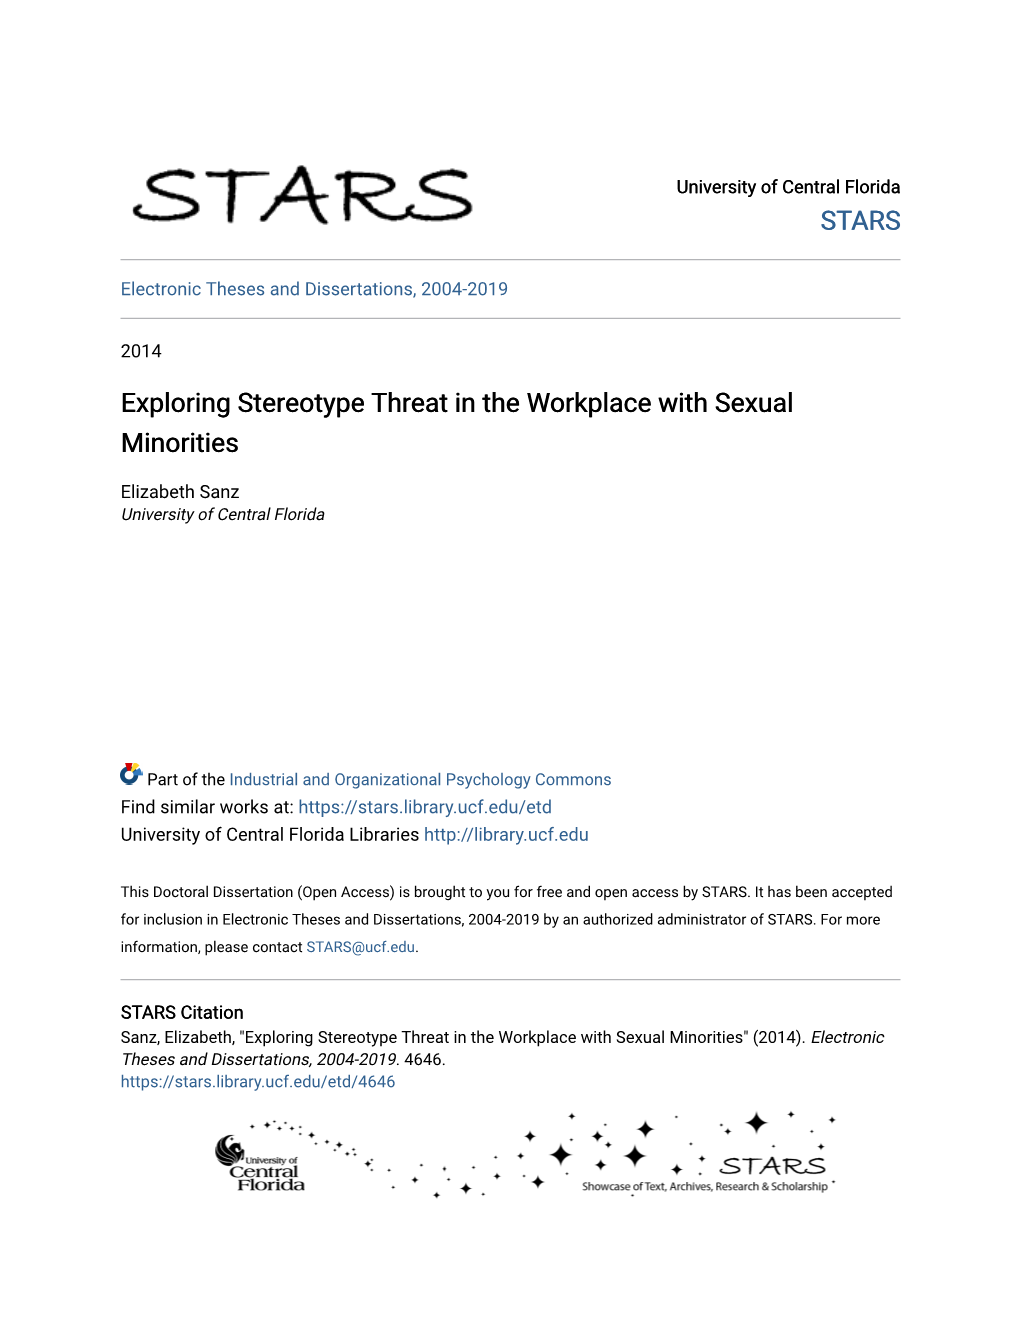 Exploring Stereotype Threat in the Workplace with Sexual Minorities